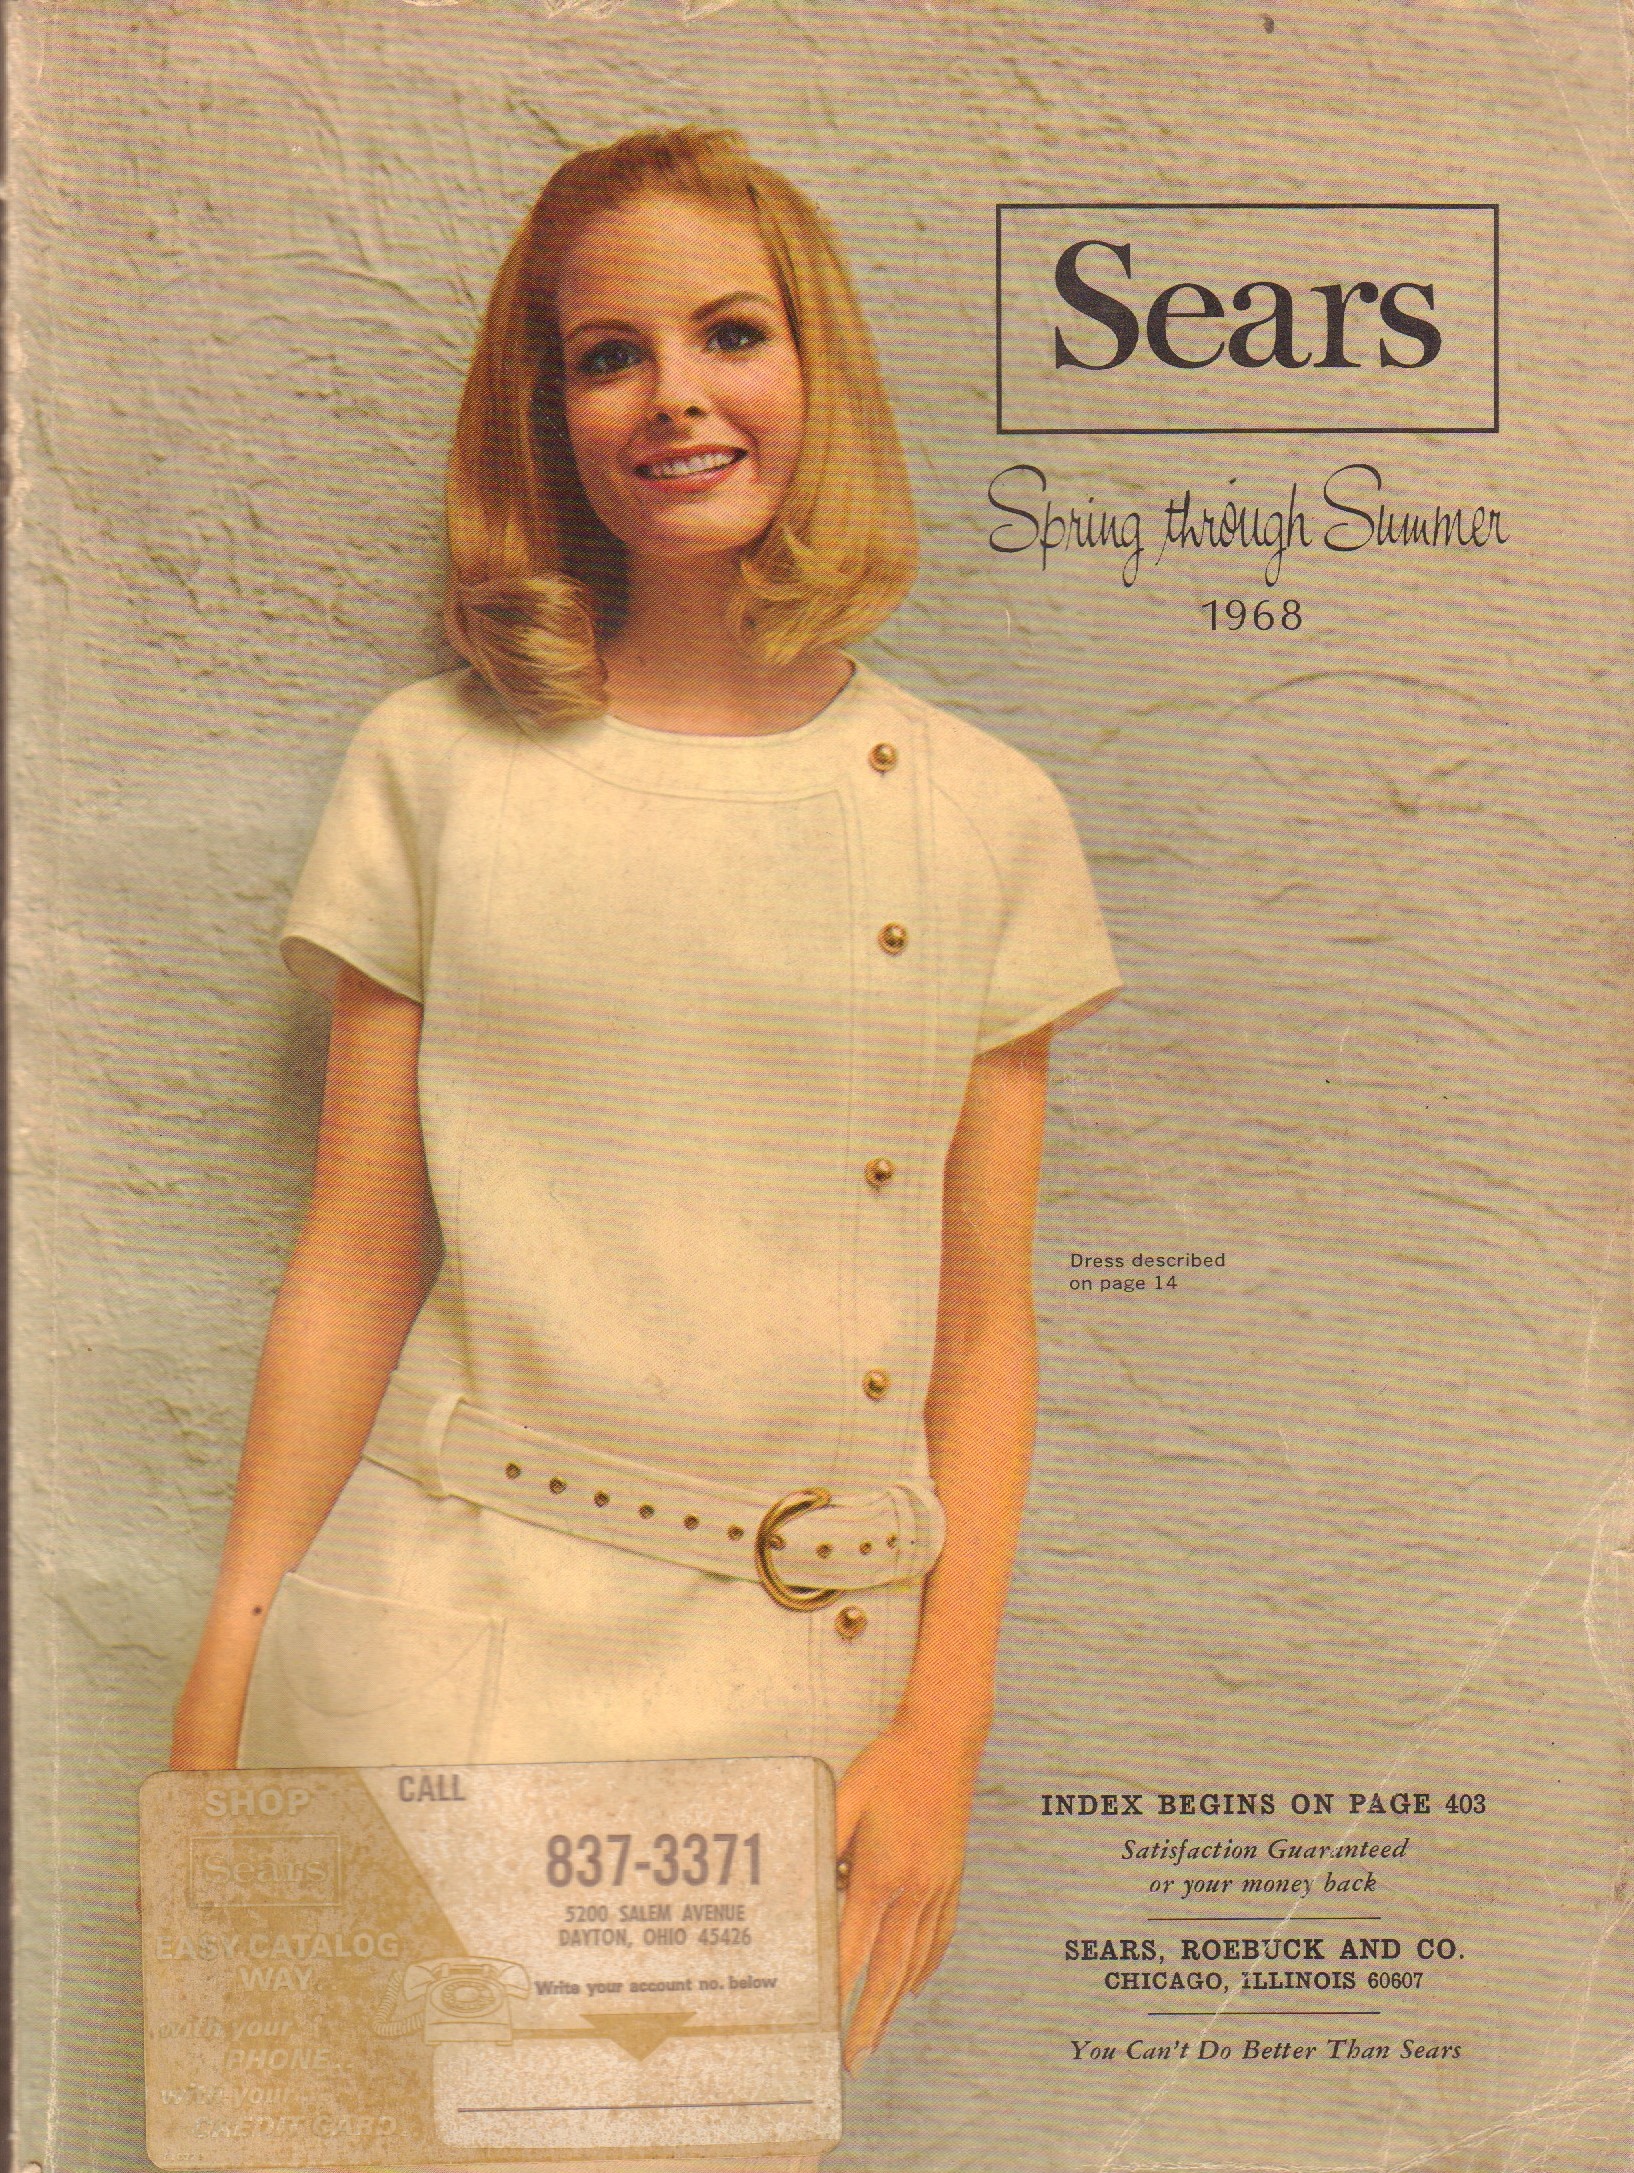 The Sears Catalog - Blanche Day Manos